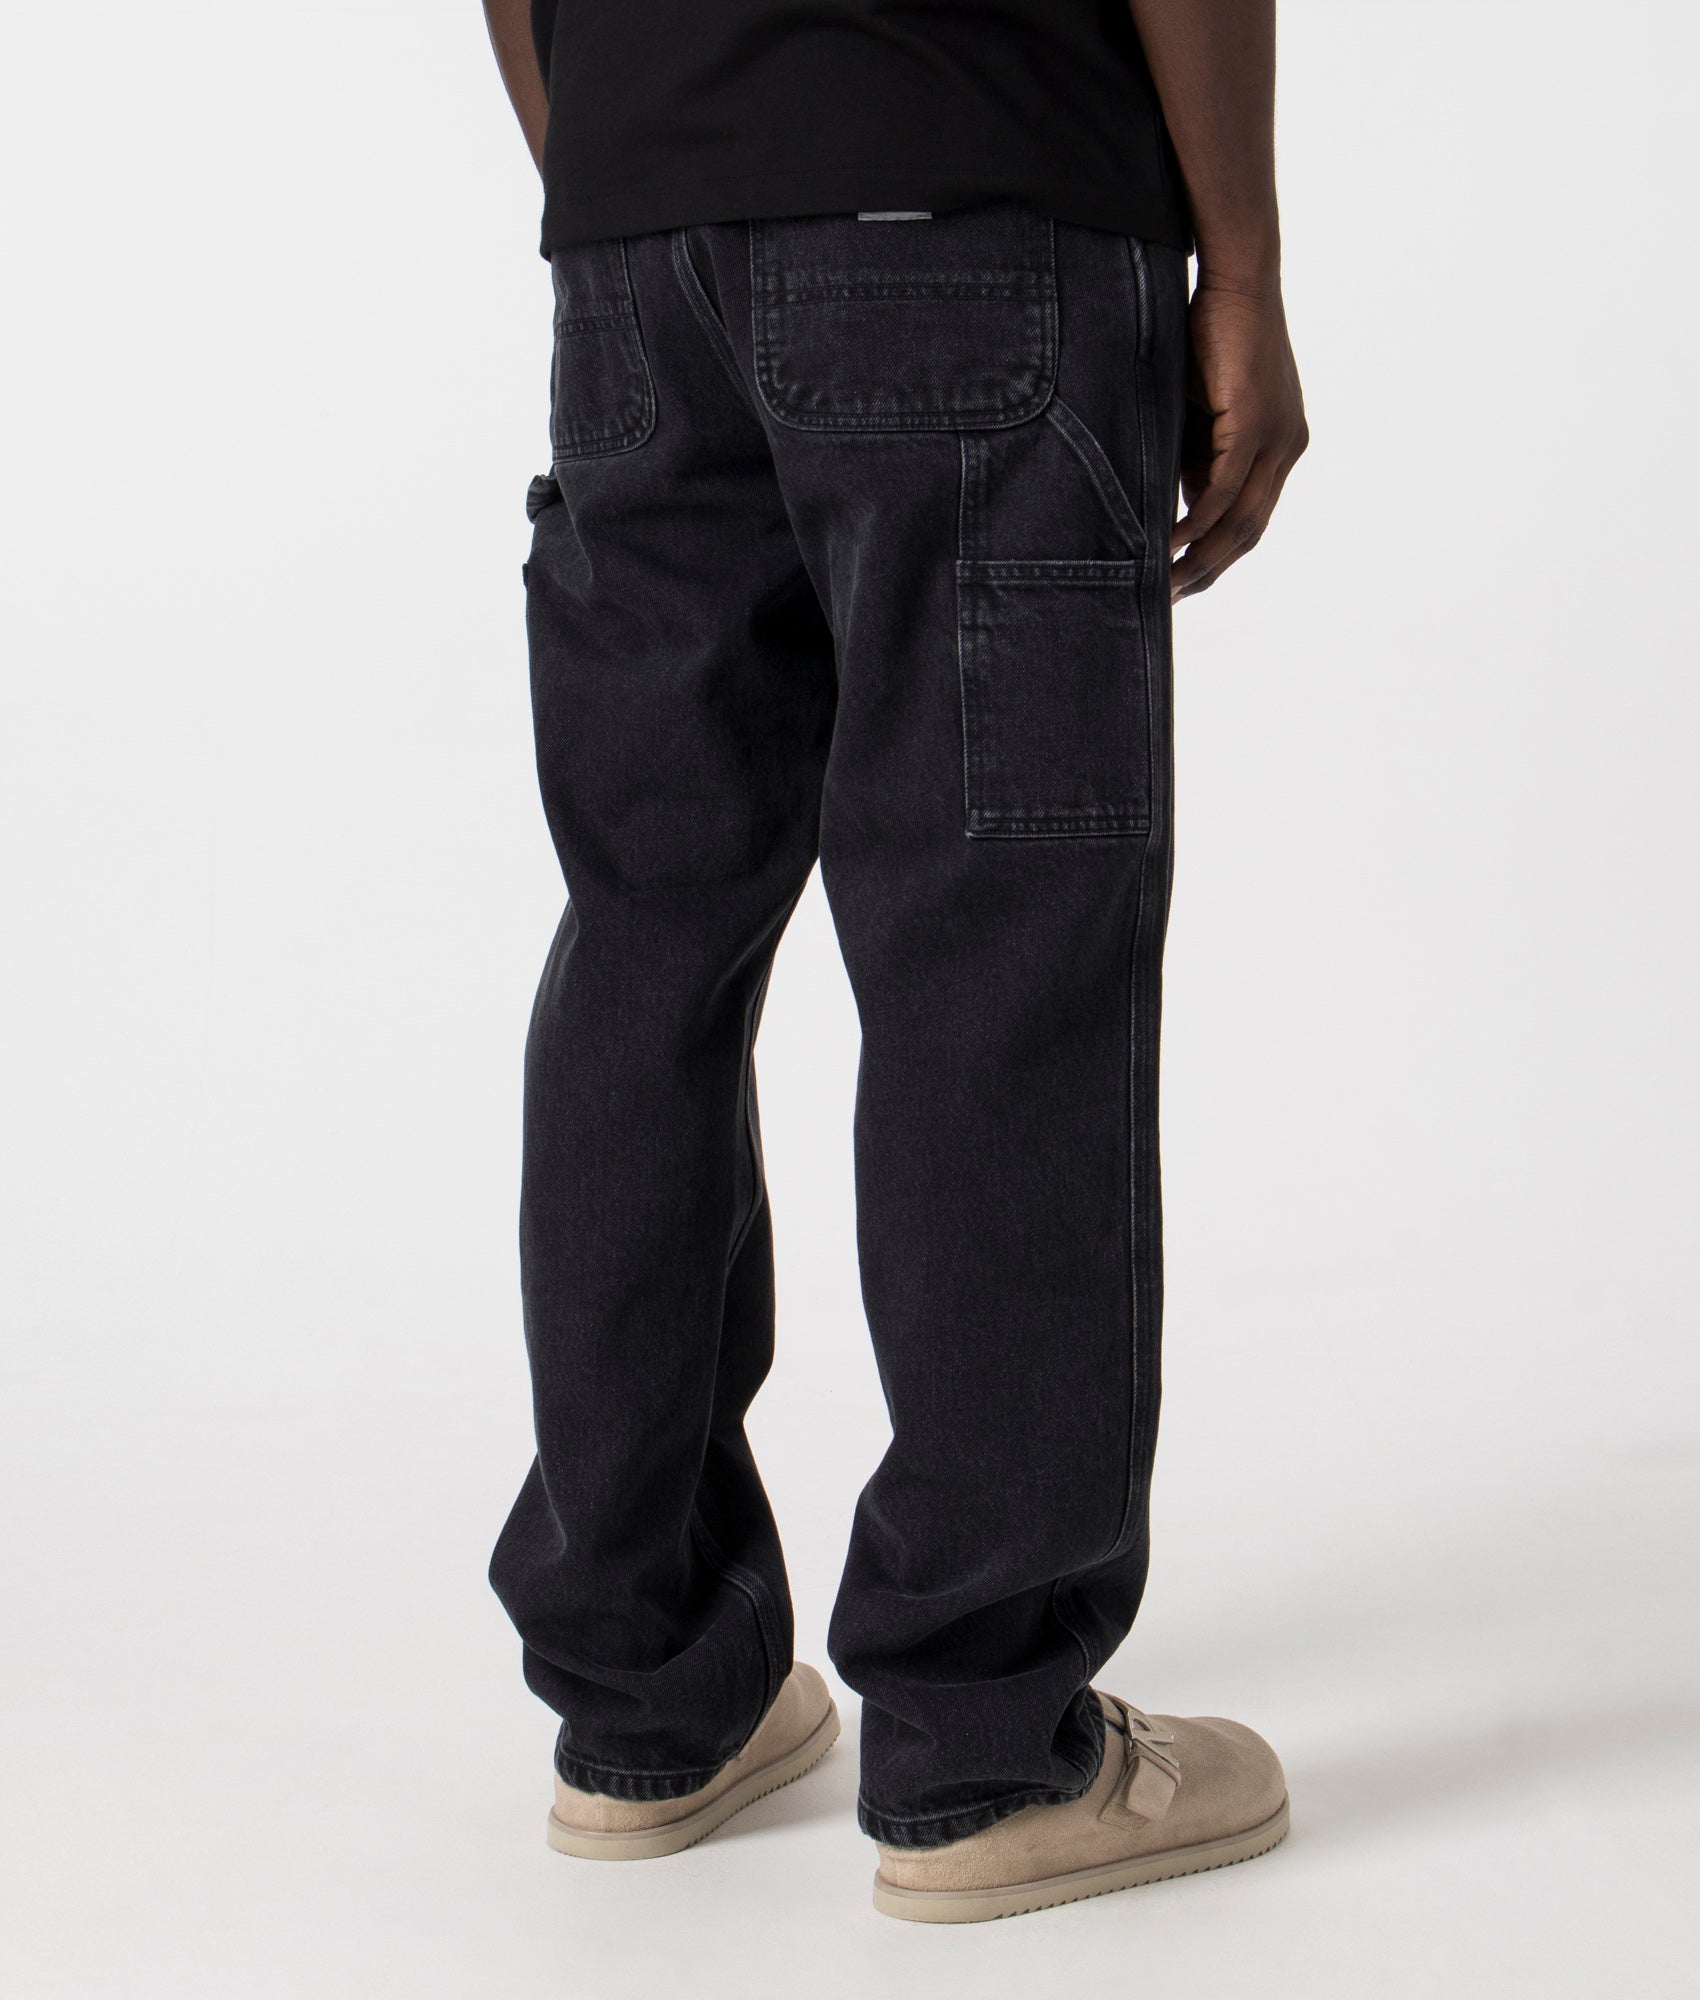 Carhartt WIP Mens Relaxed Fit Single Knee Pants - Colour: 8906 Black Stonewashed - Size: 34R